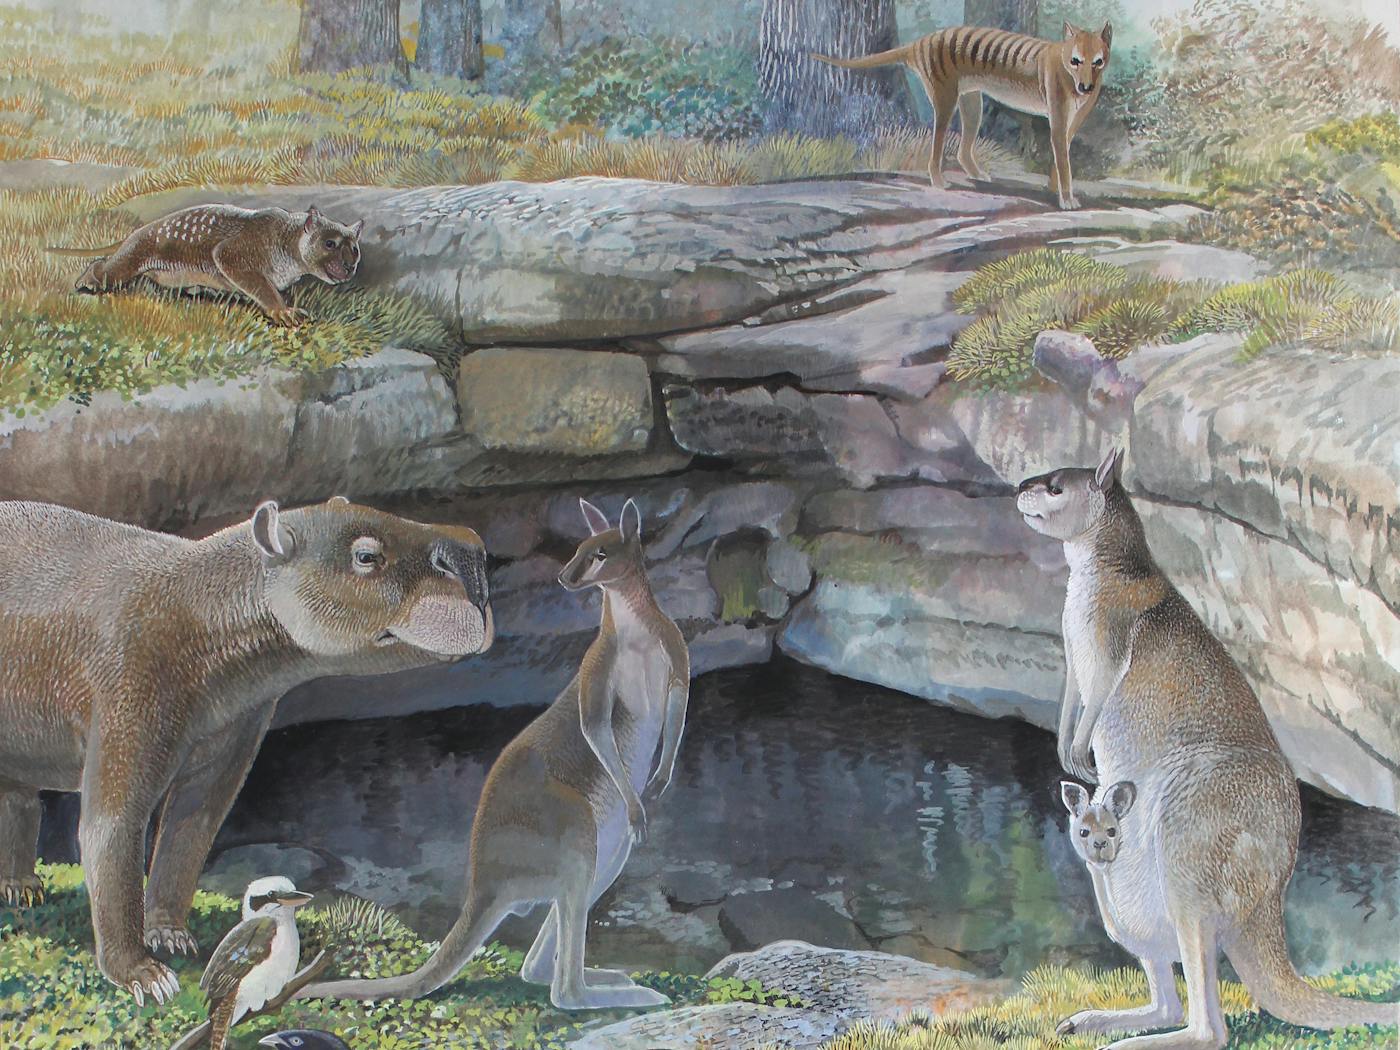 Colourful artwork of animals that look similar to native Australian marsupials today